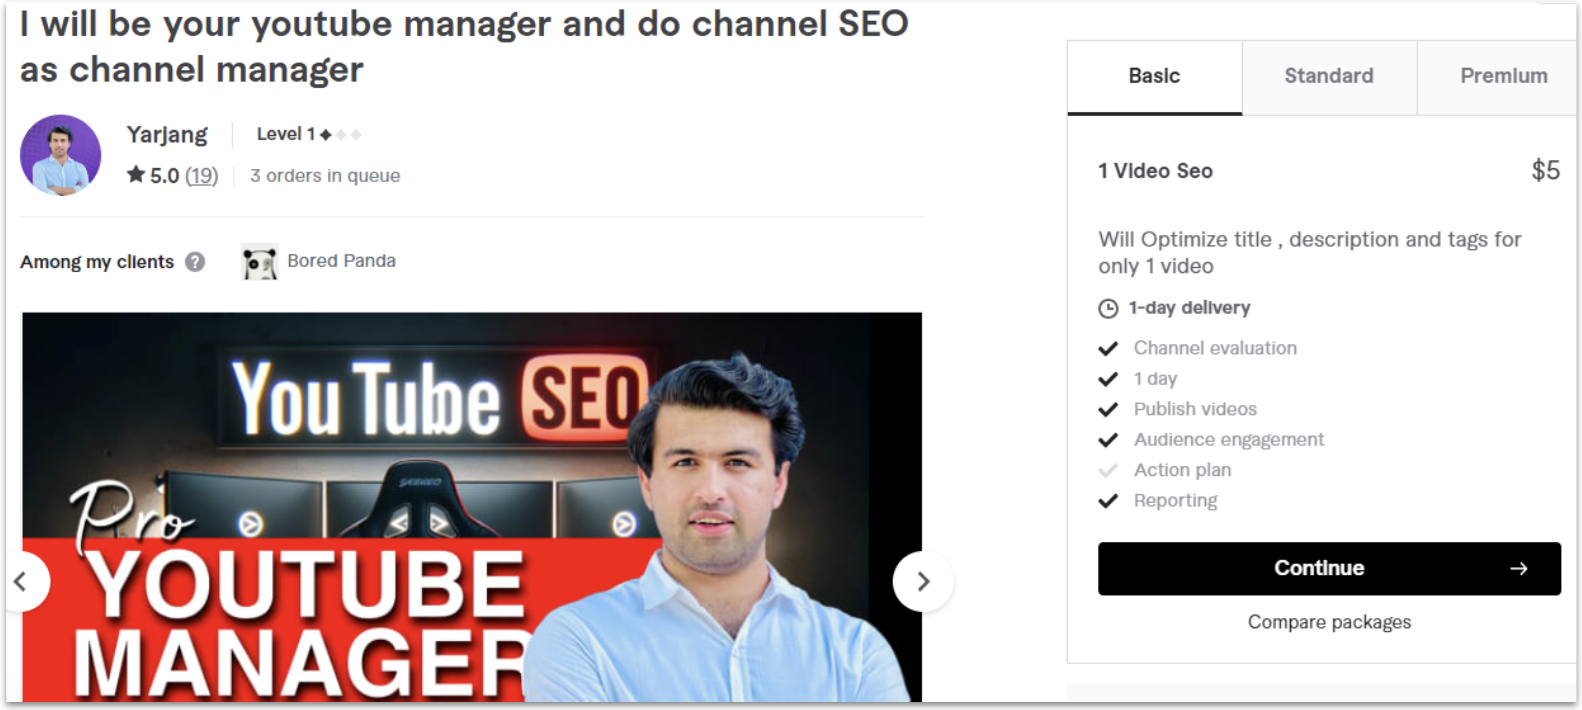 A YouTube Channel Manager gig from Fiverr user Yarjangbabur